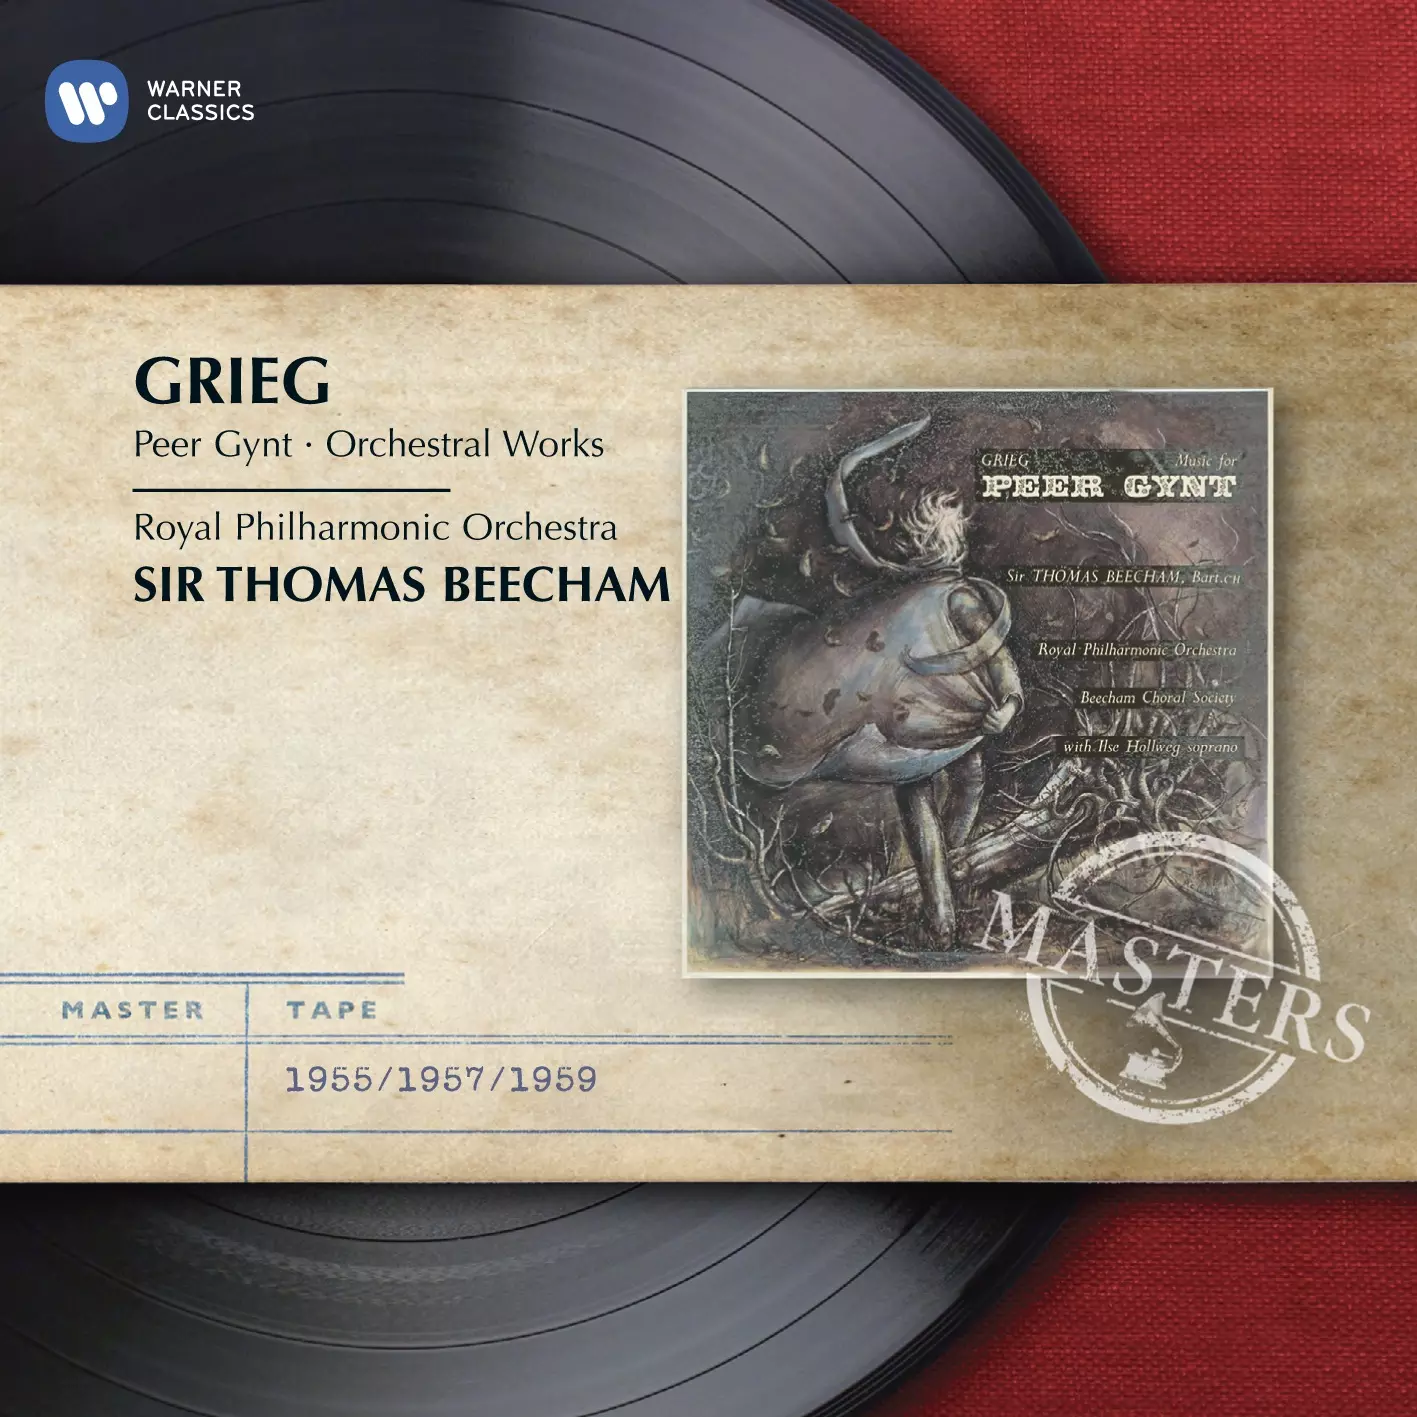 Grieg: Peer Gynt - Orchestral Works